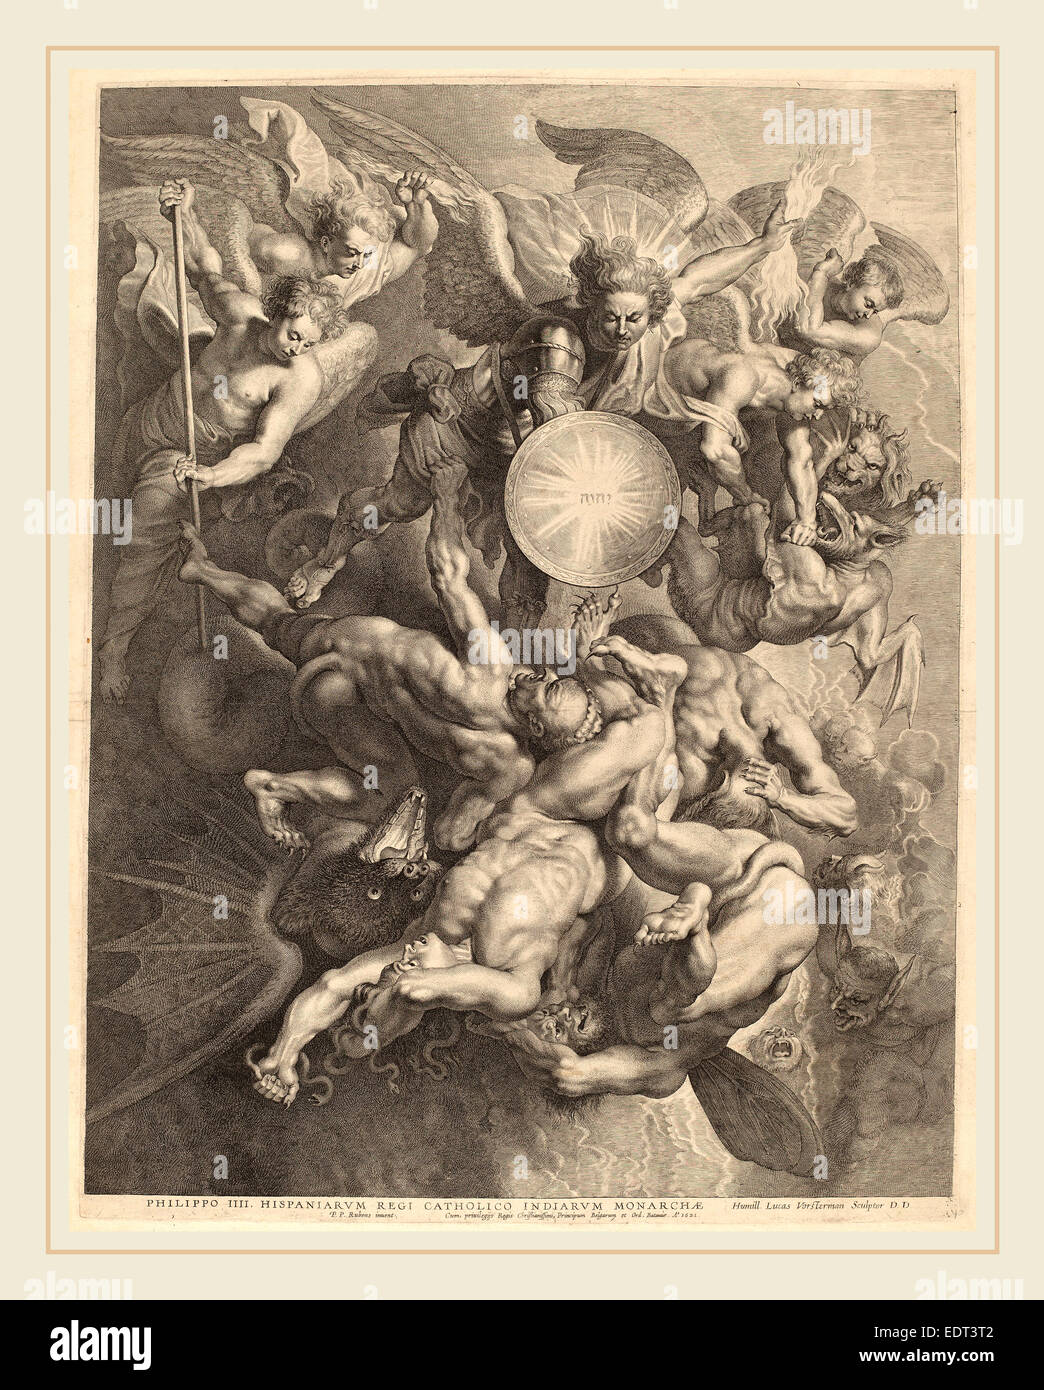 Lucas Emil Vorsterman after Sir Peter Paul Rubens (Flemish, 1595-1675), The Fall of the Rebel Angels, 1621, engraving Stock Photo